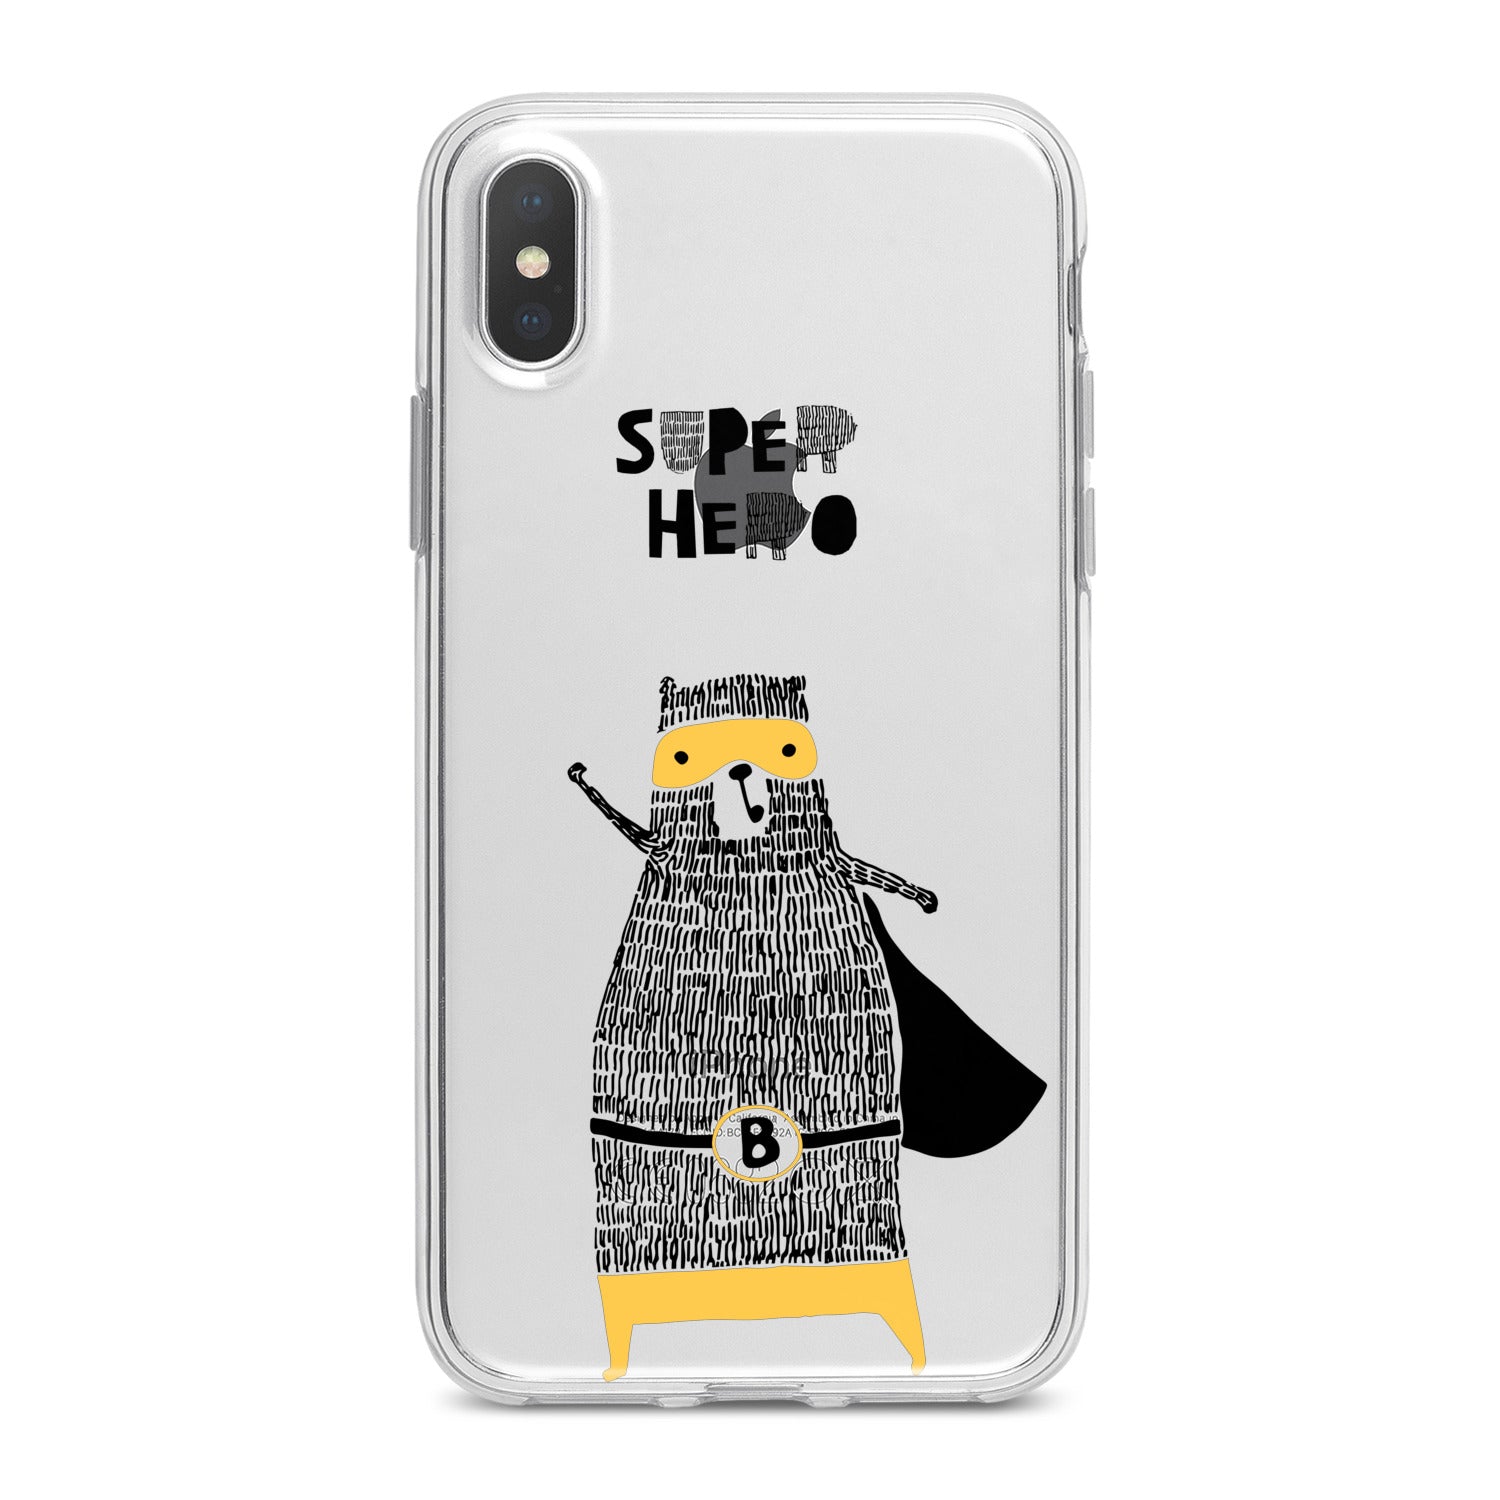 Lex Altern Super Hero Phone Case for your iPhone & Android phone.